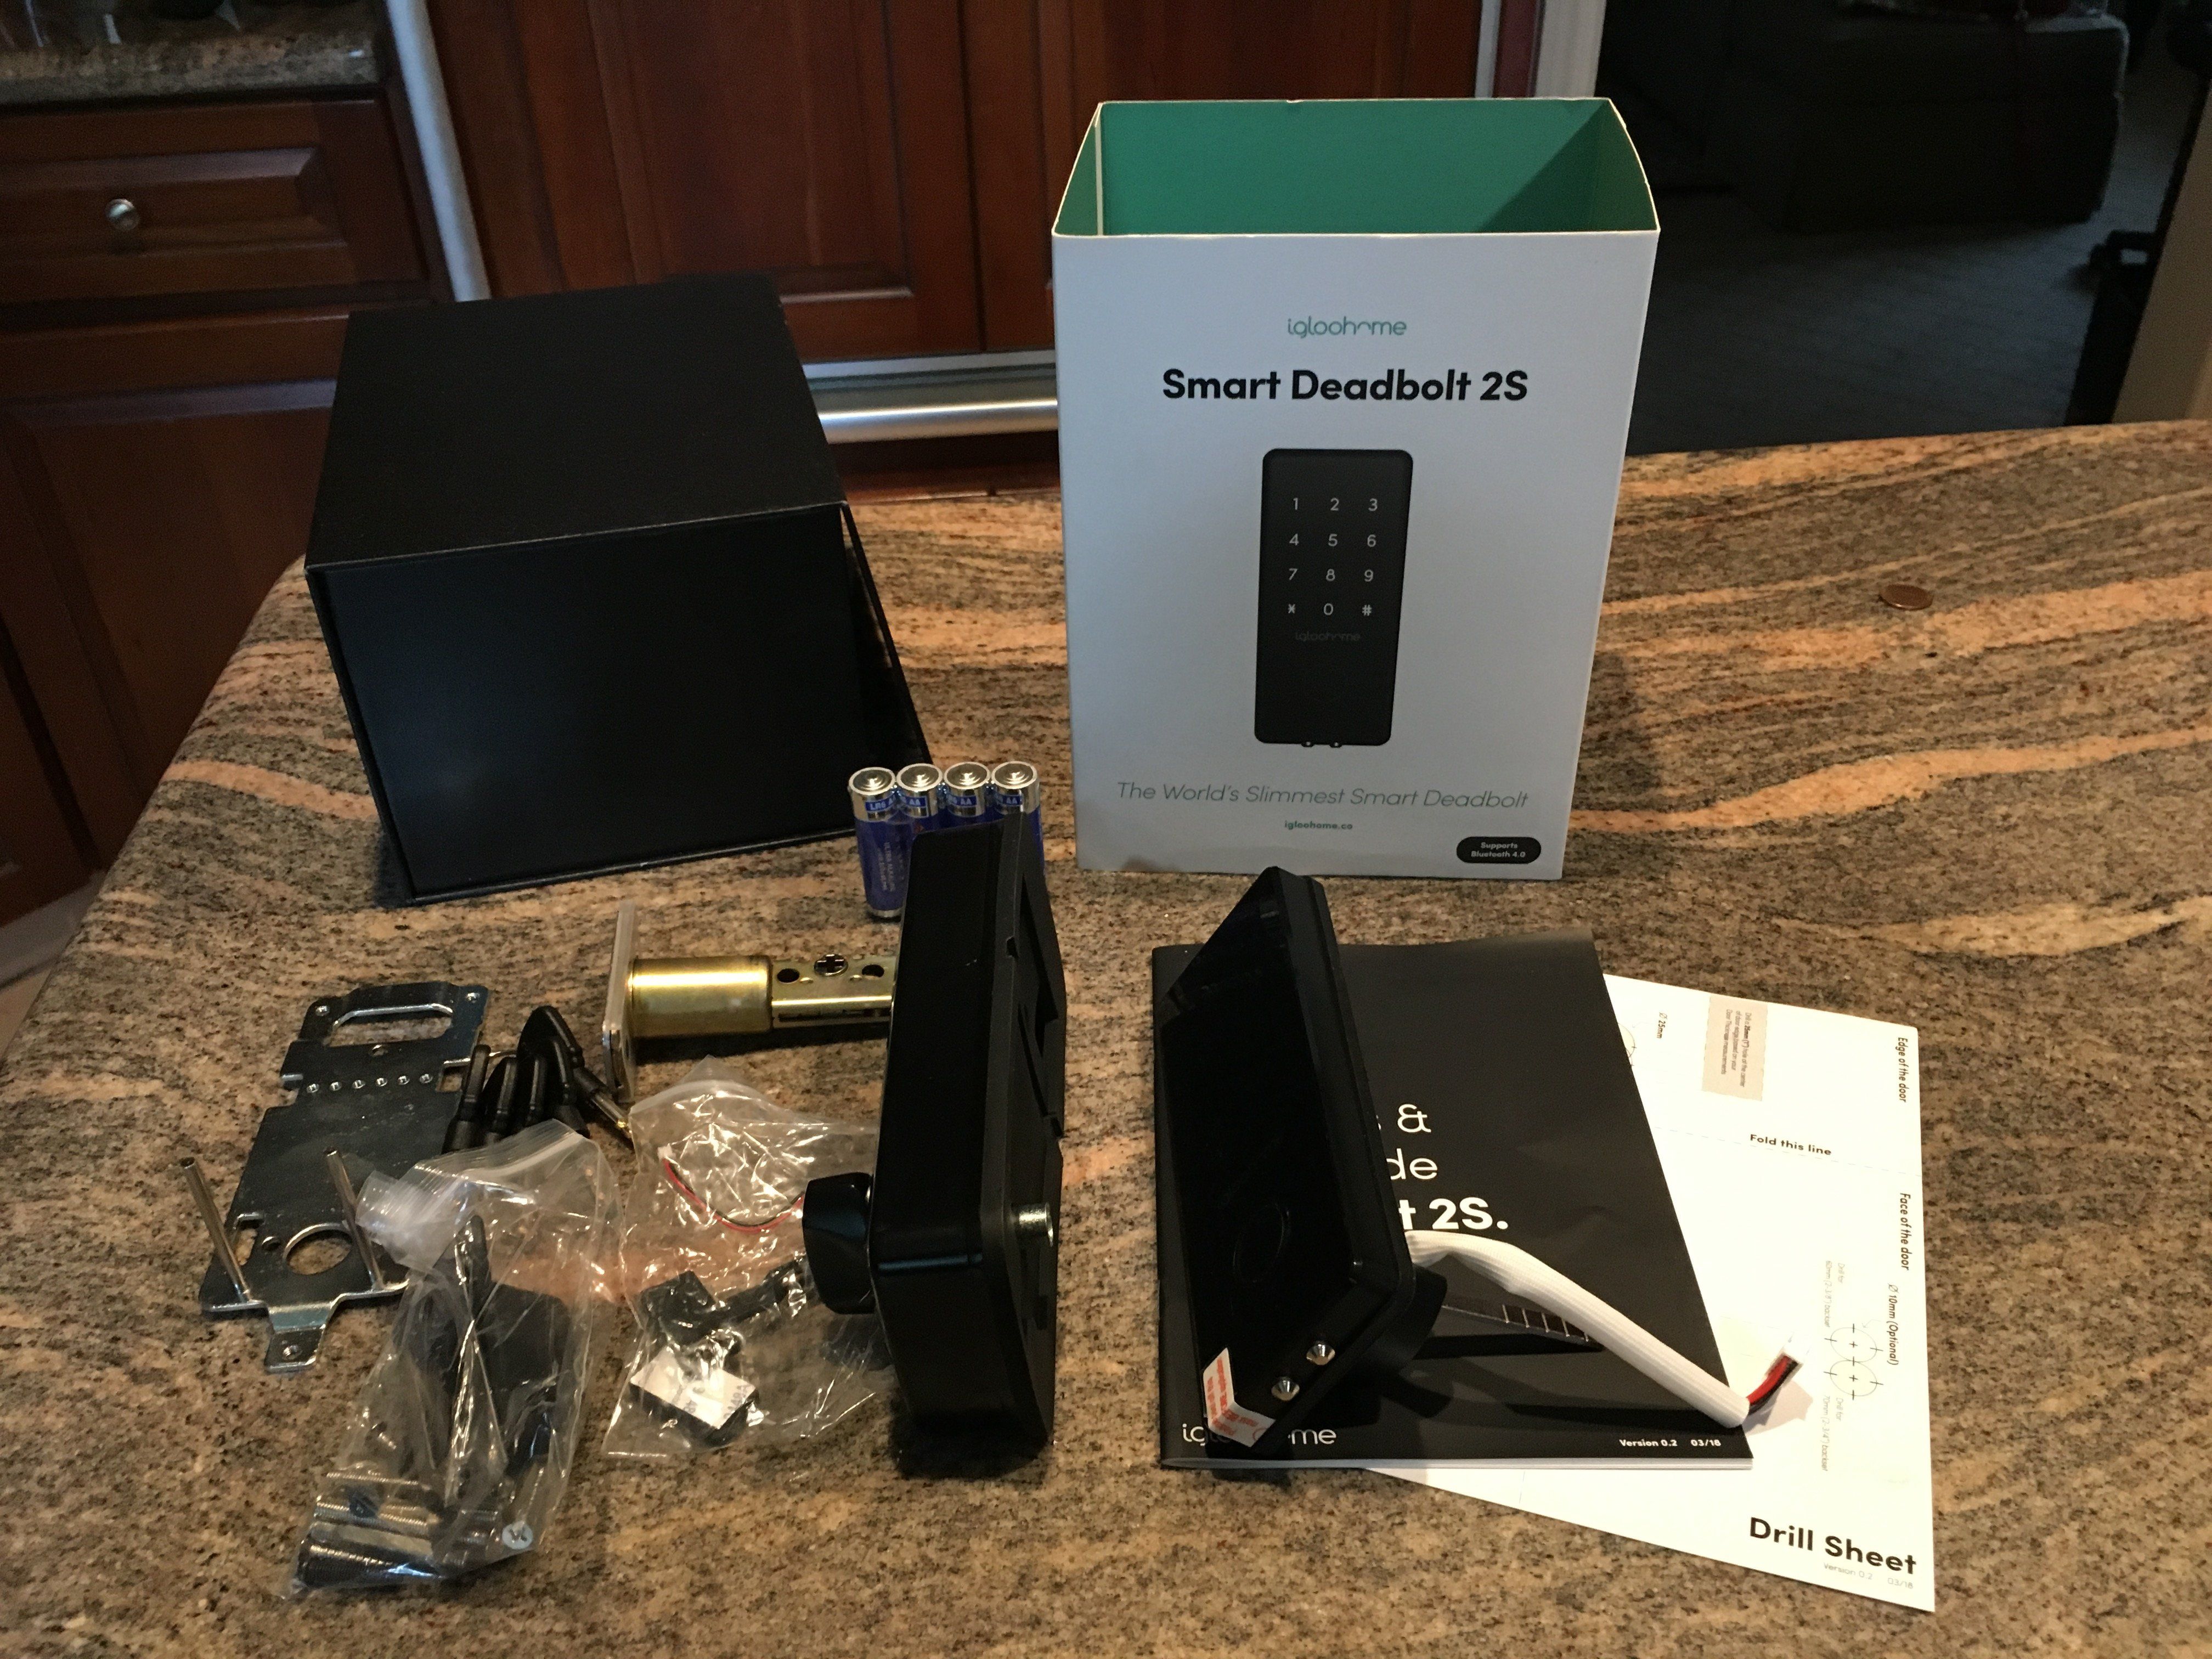 Photo of igloohome deadbolt lock unboxed on a countertop